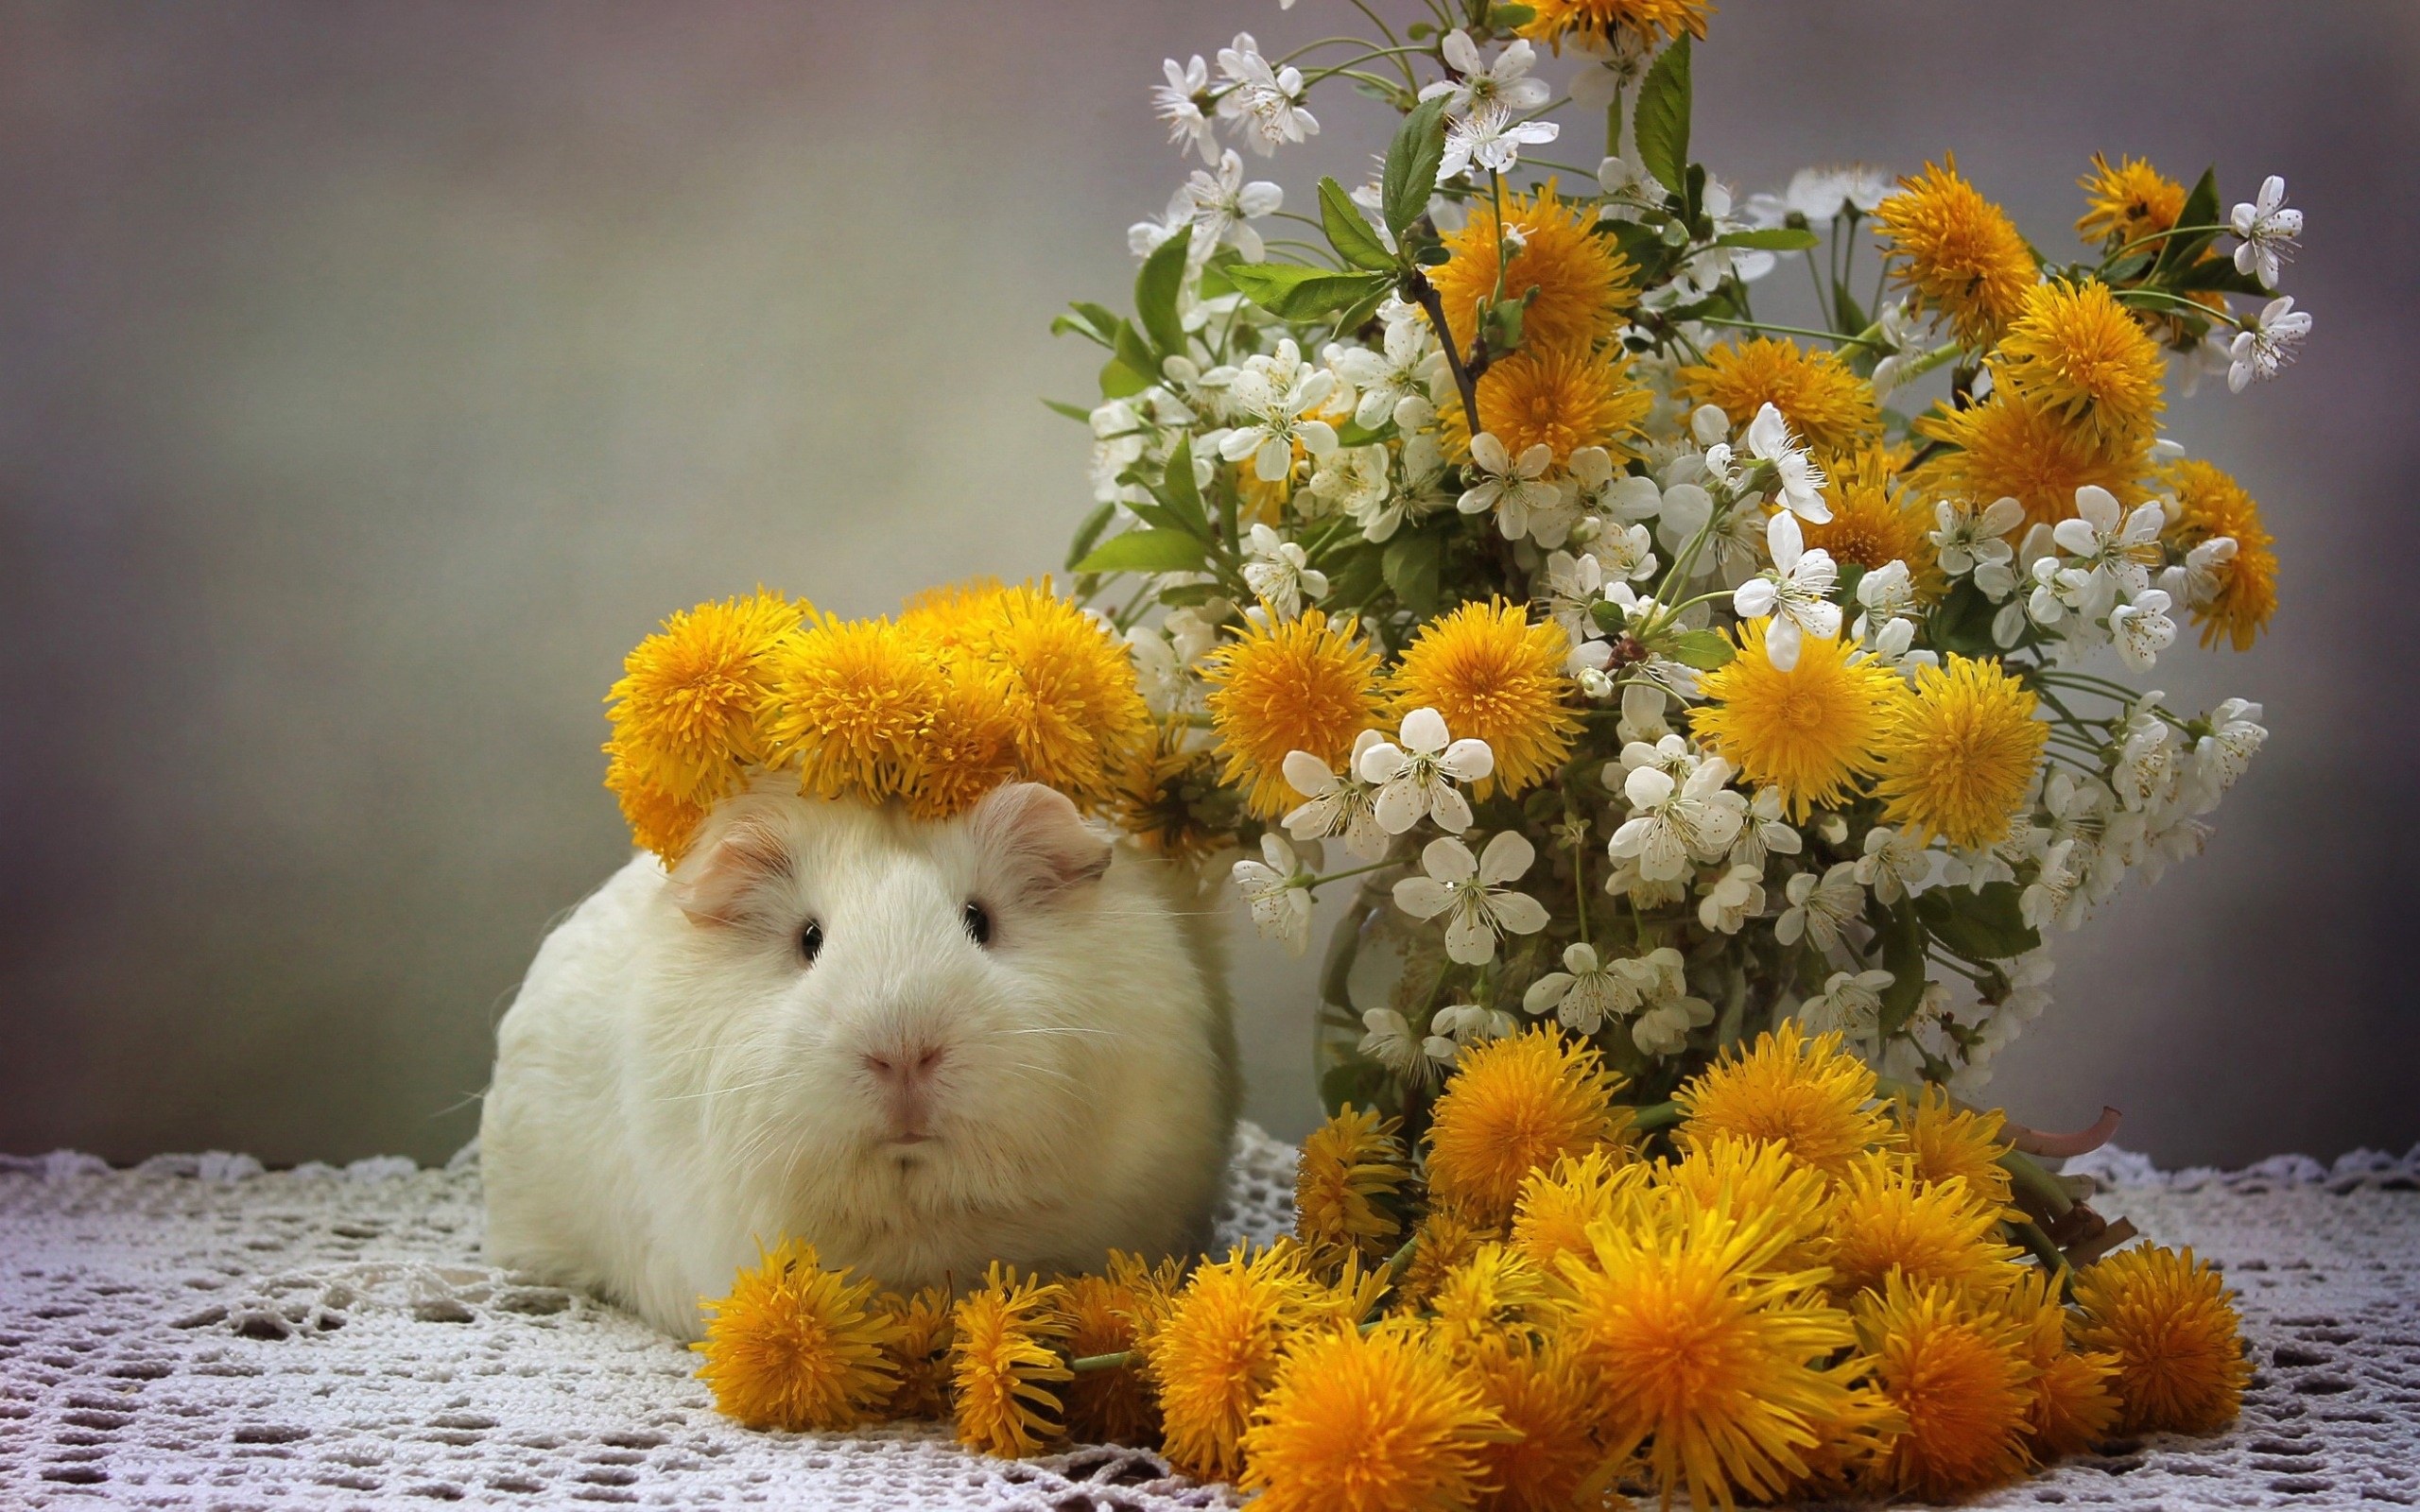 White guinea pig wallpaper, Cute animal pets, Spring flowers, Beautiful high-quality pictures, 2560x1600 HD Desktop